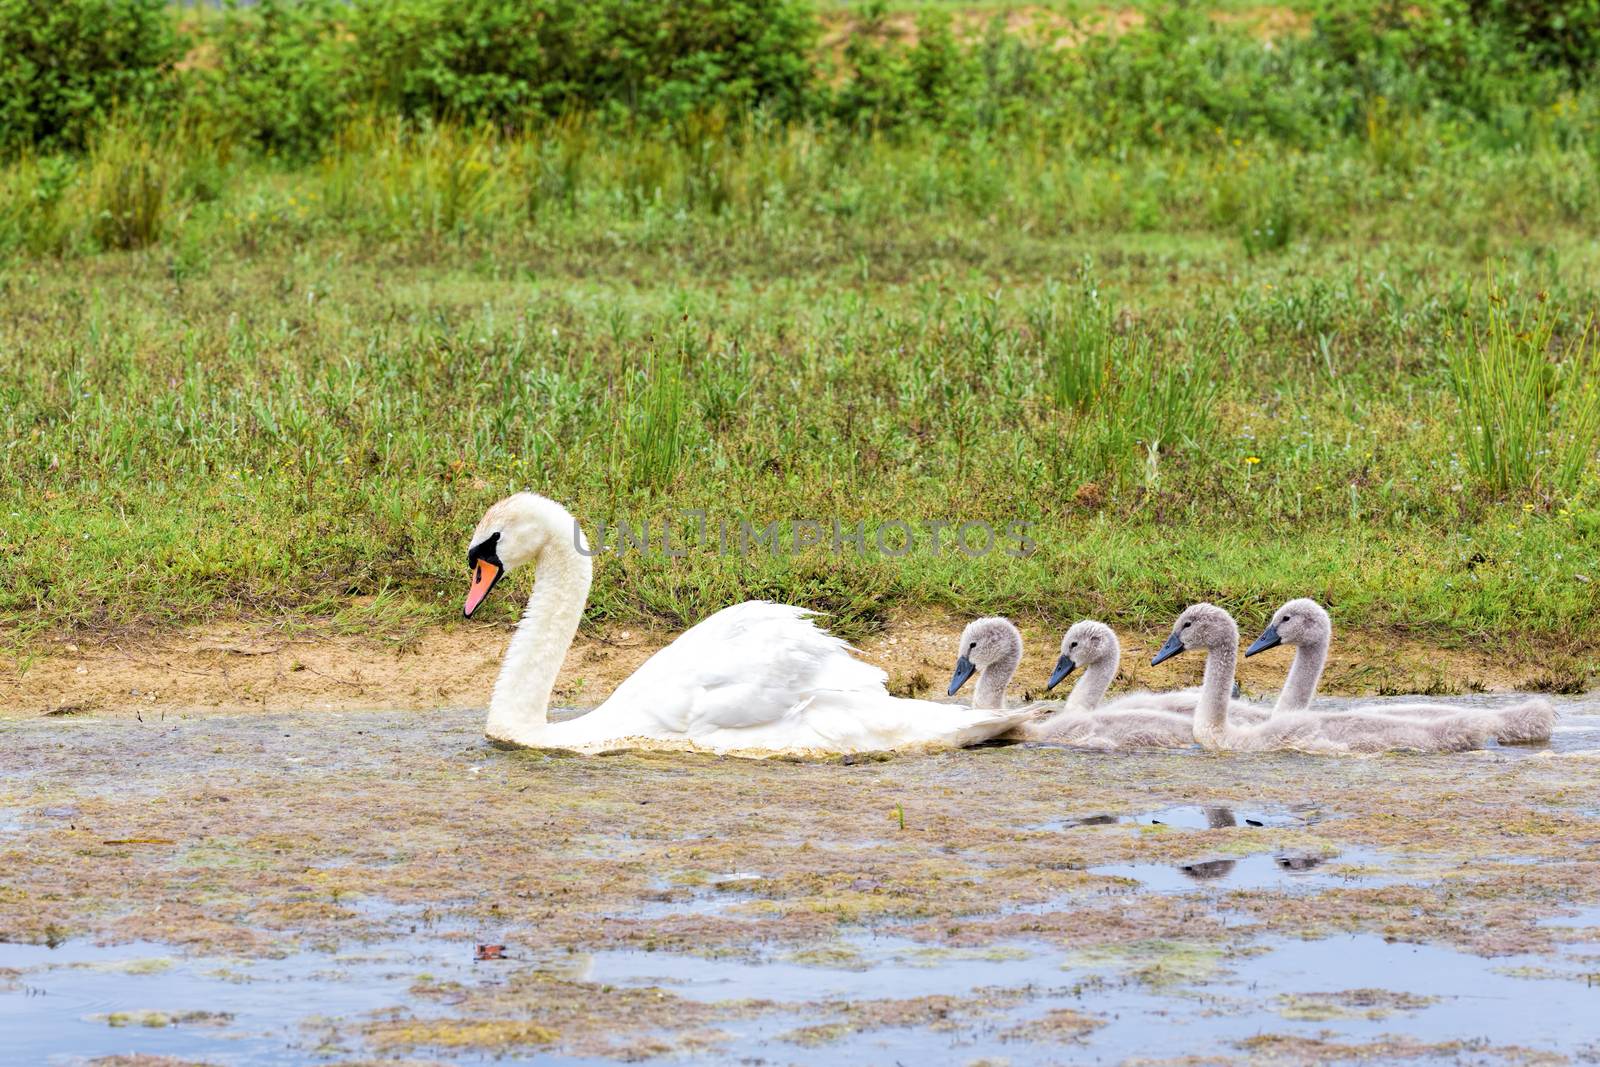 White mother swan swimming with young following